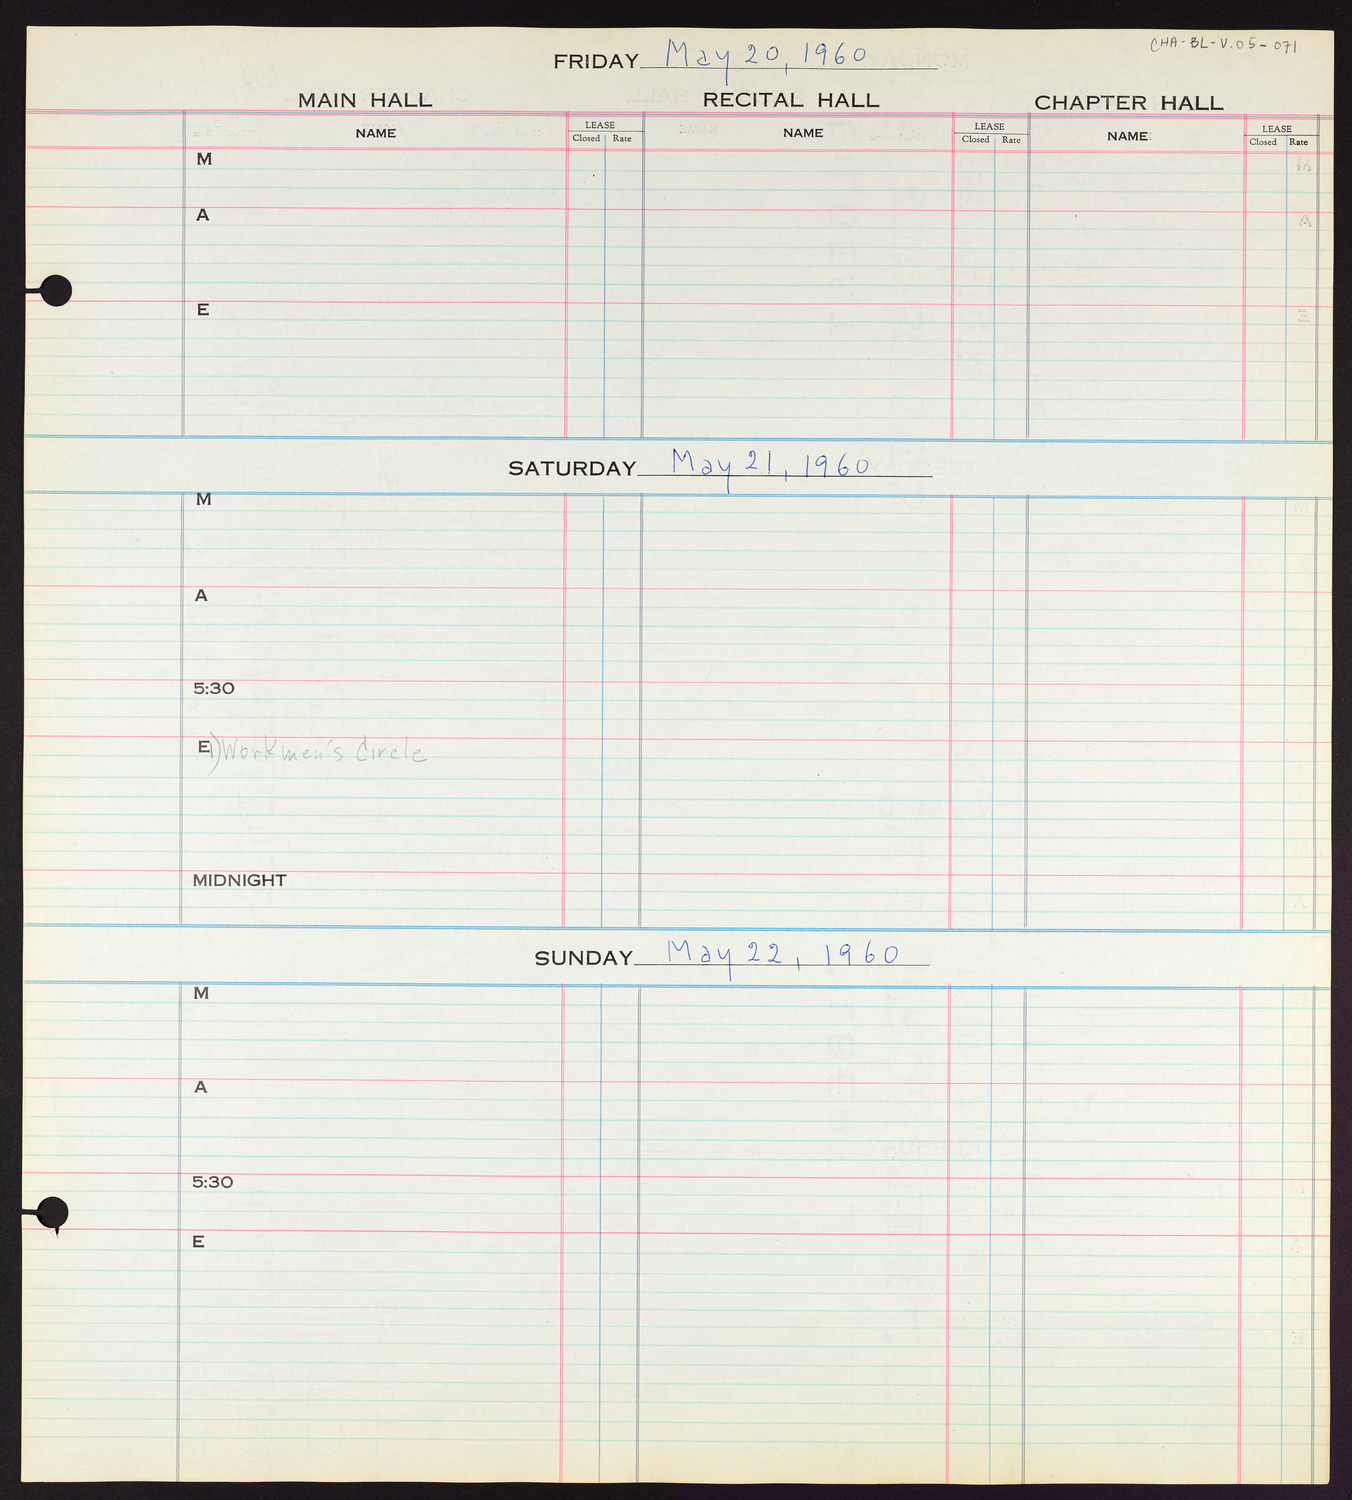 Carnegie Hall Booking Ledger, volume 5, page 71